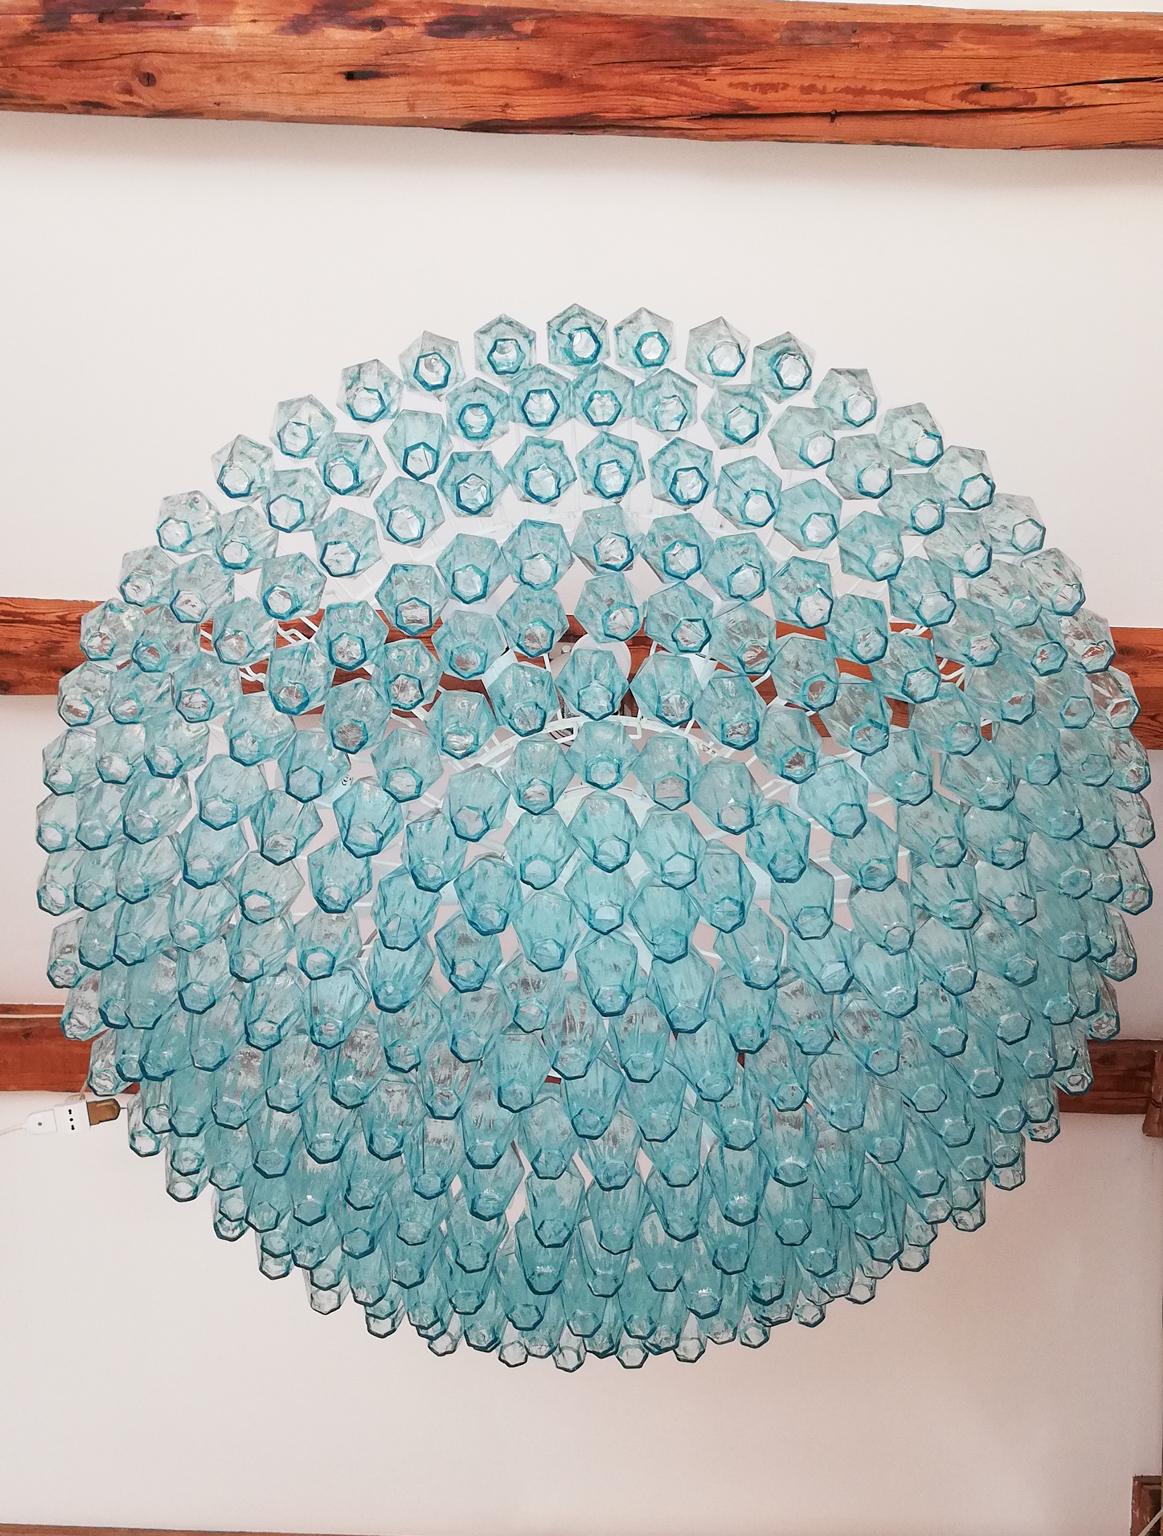 Hand-Crafted Alberto Donà Midcentury Light Blue Murano Glass Poliedri Chandelier, Italy, 1985 For Sale